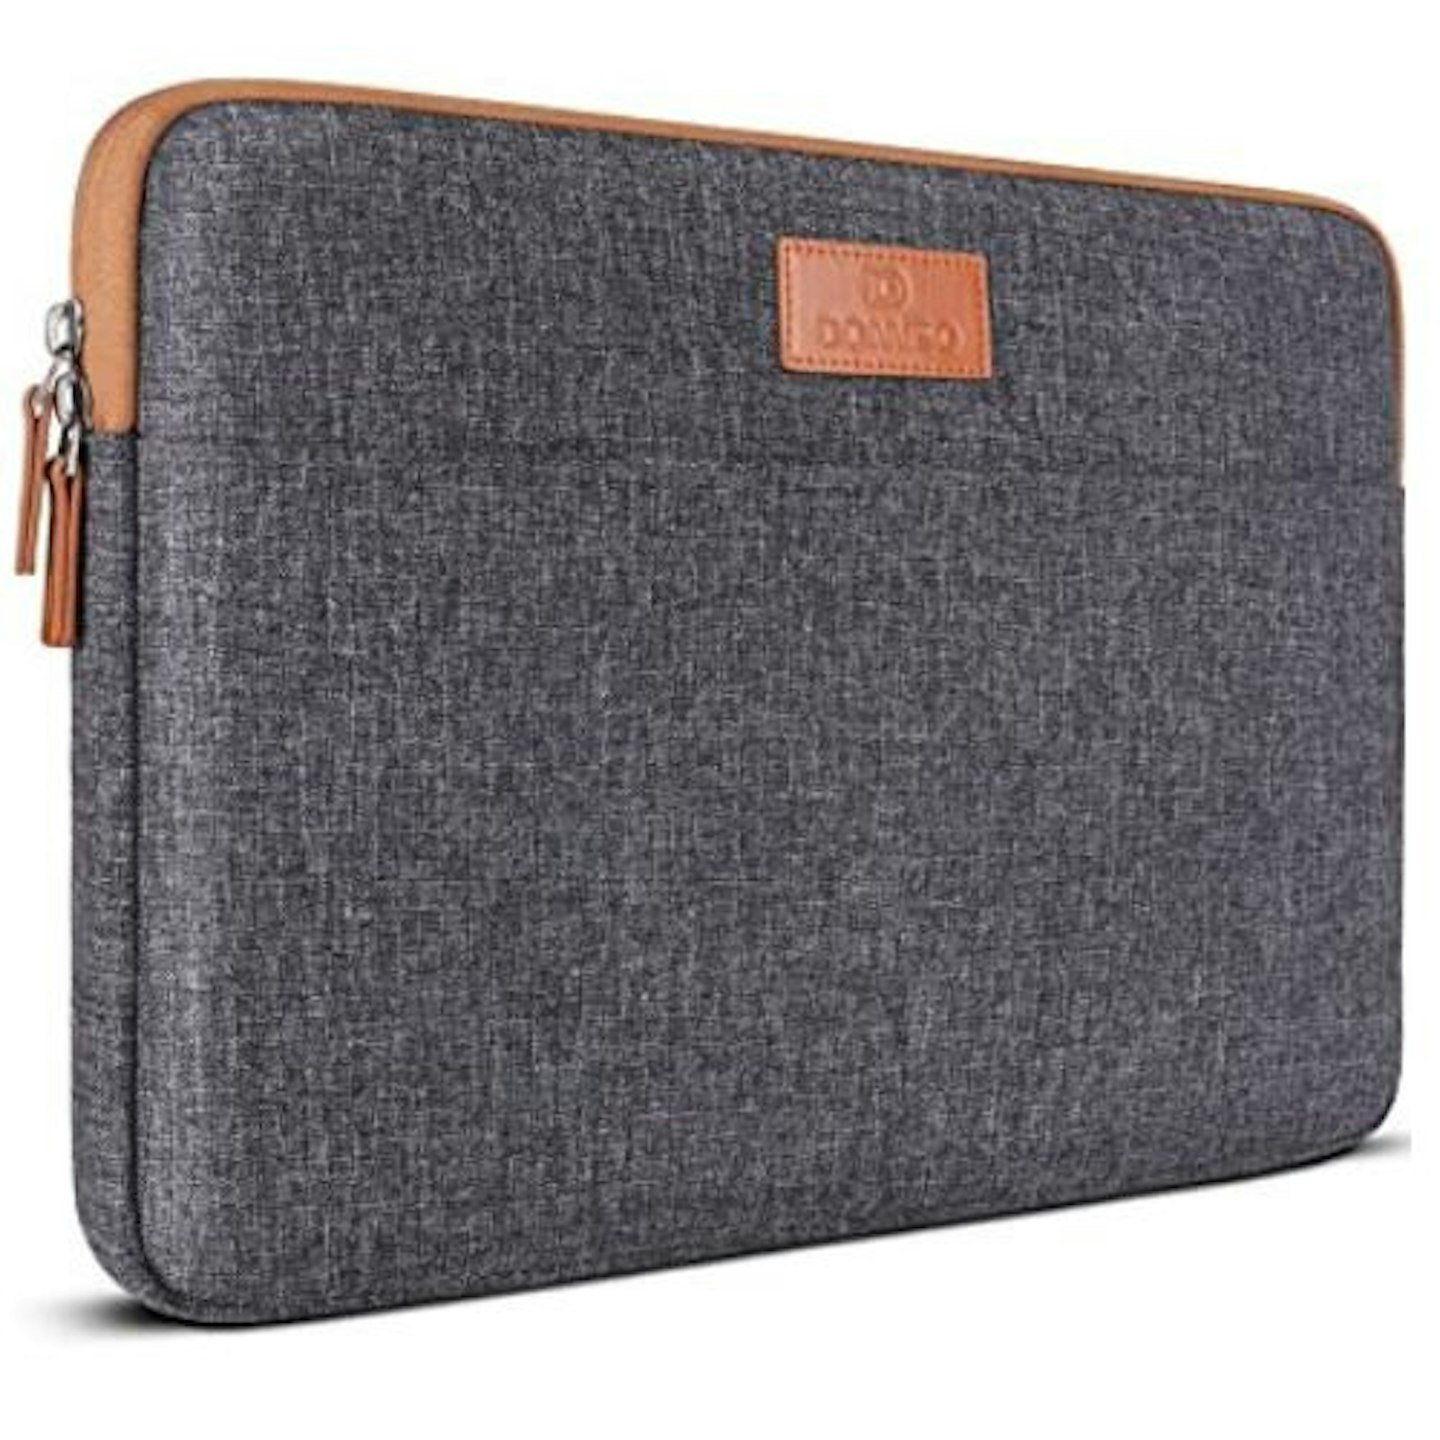 DOMISO 10 inch Tablet Laptop Sleeve